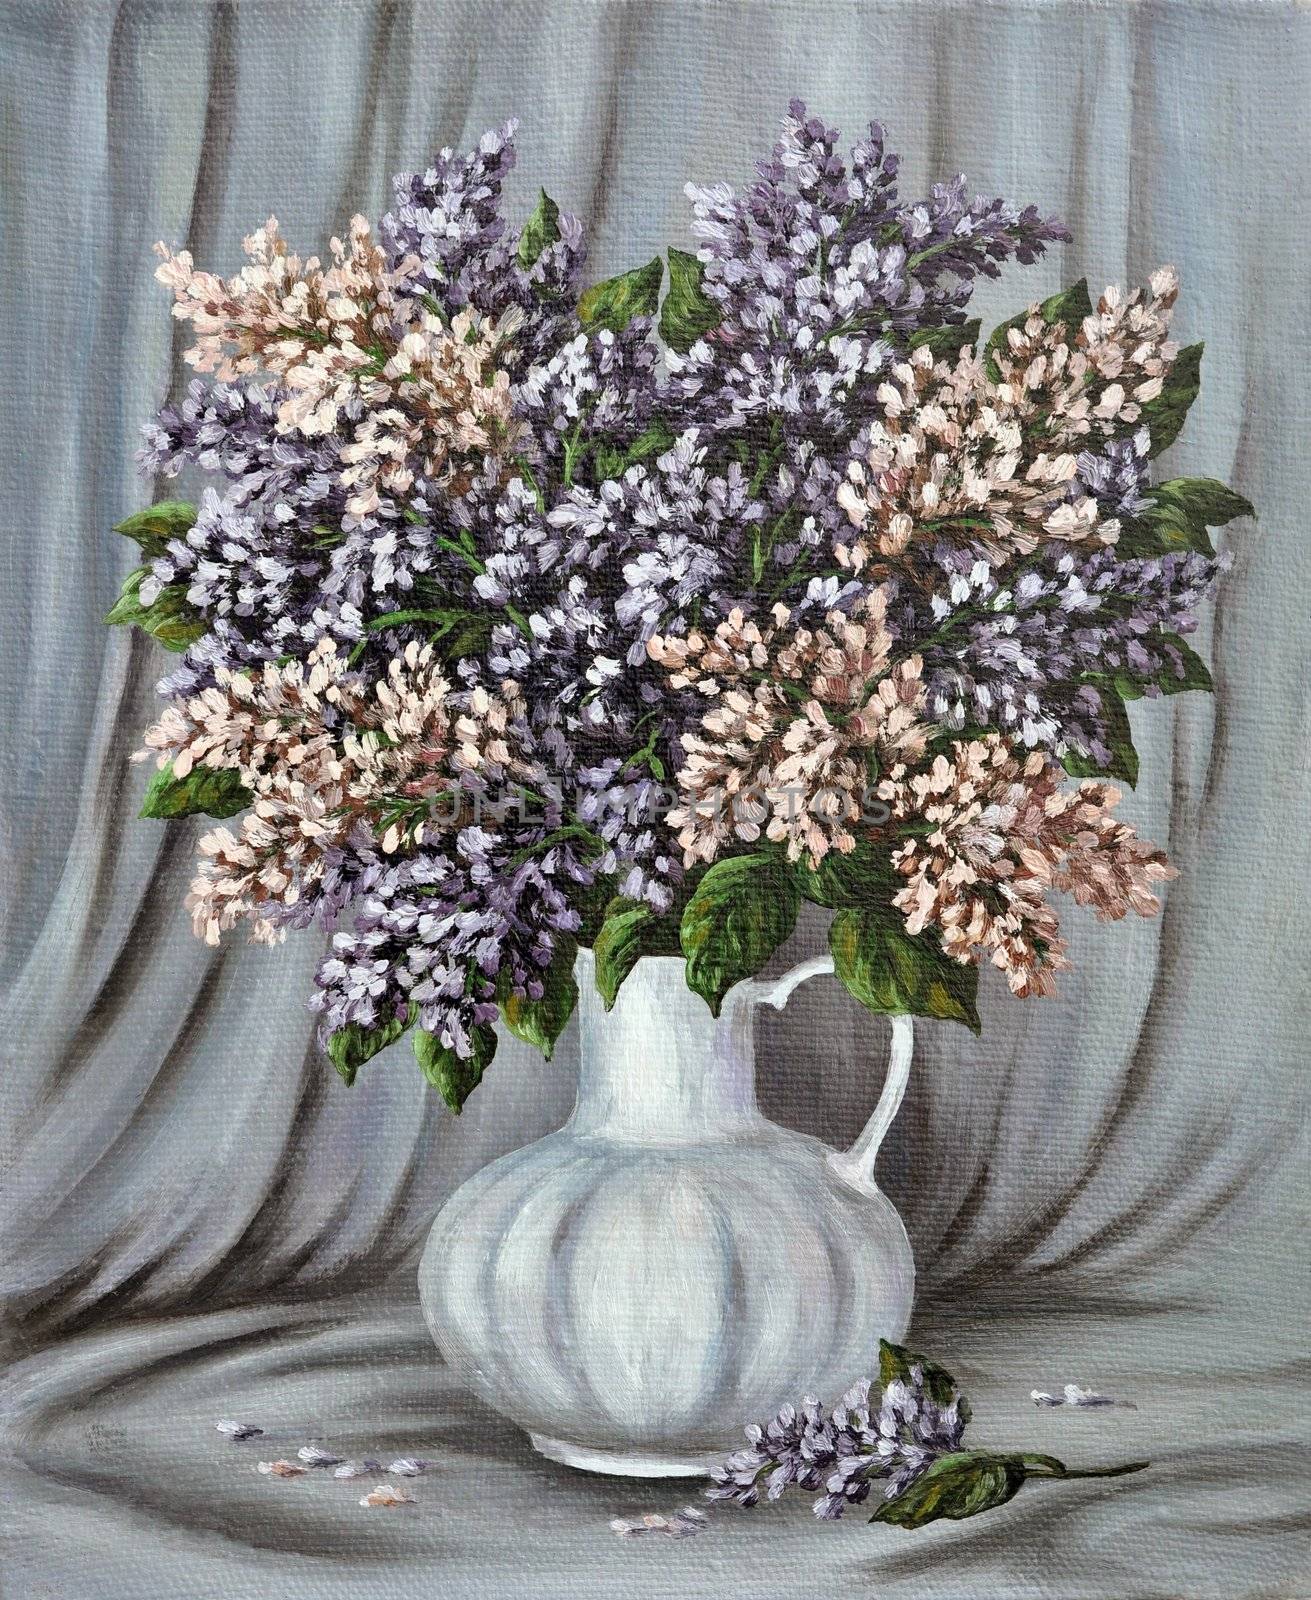 Lilac in a white porcelain jug by alexcoolok